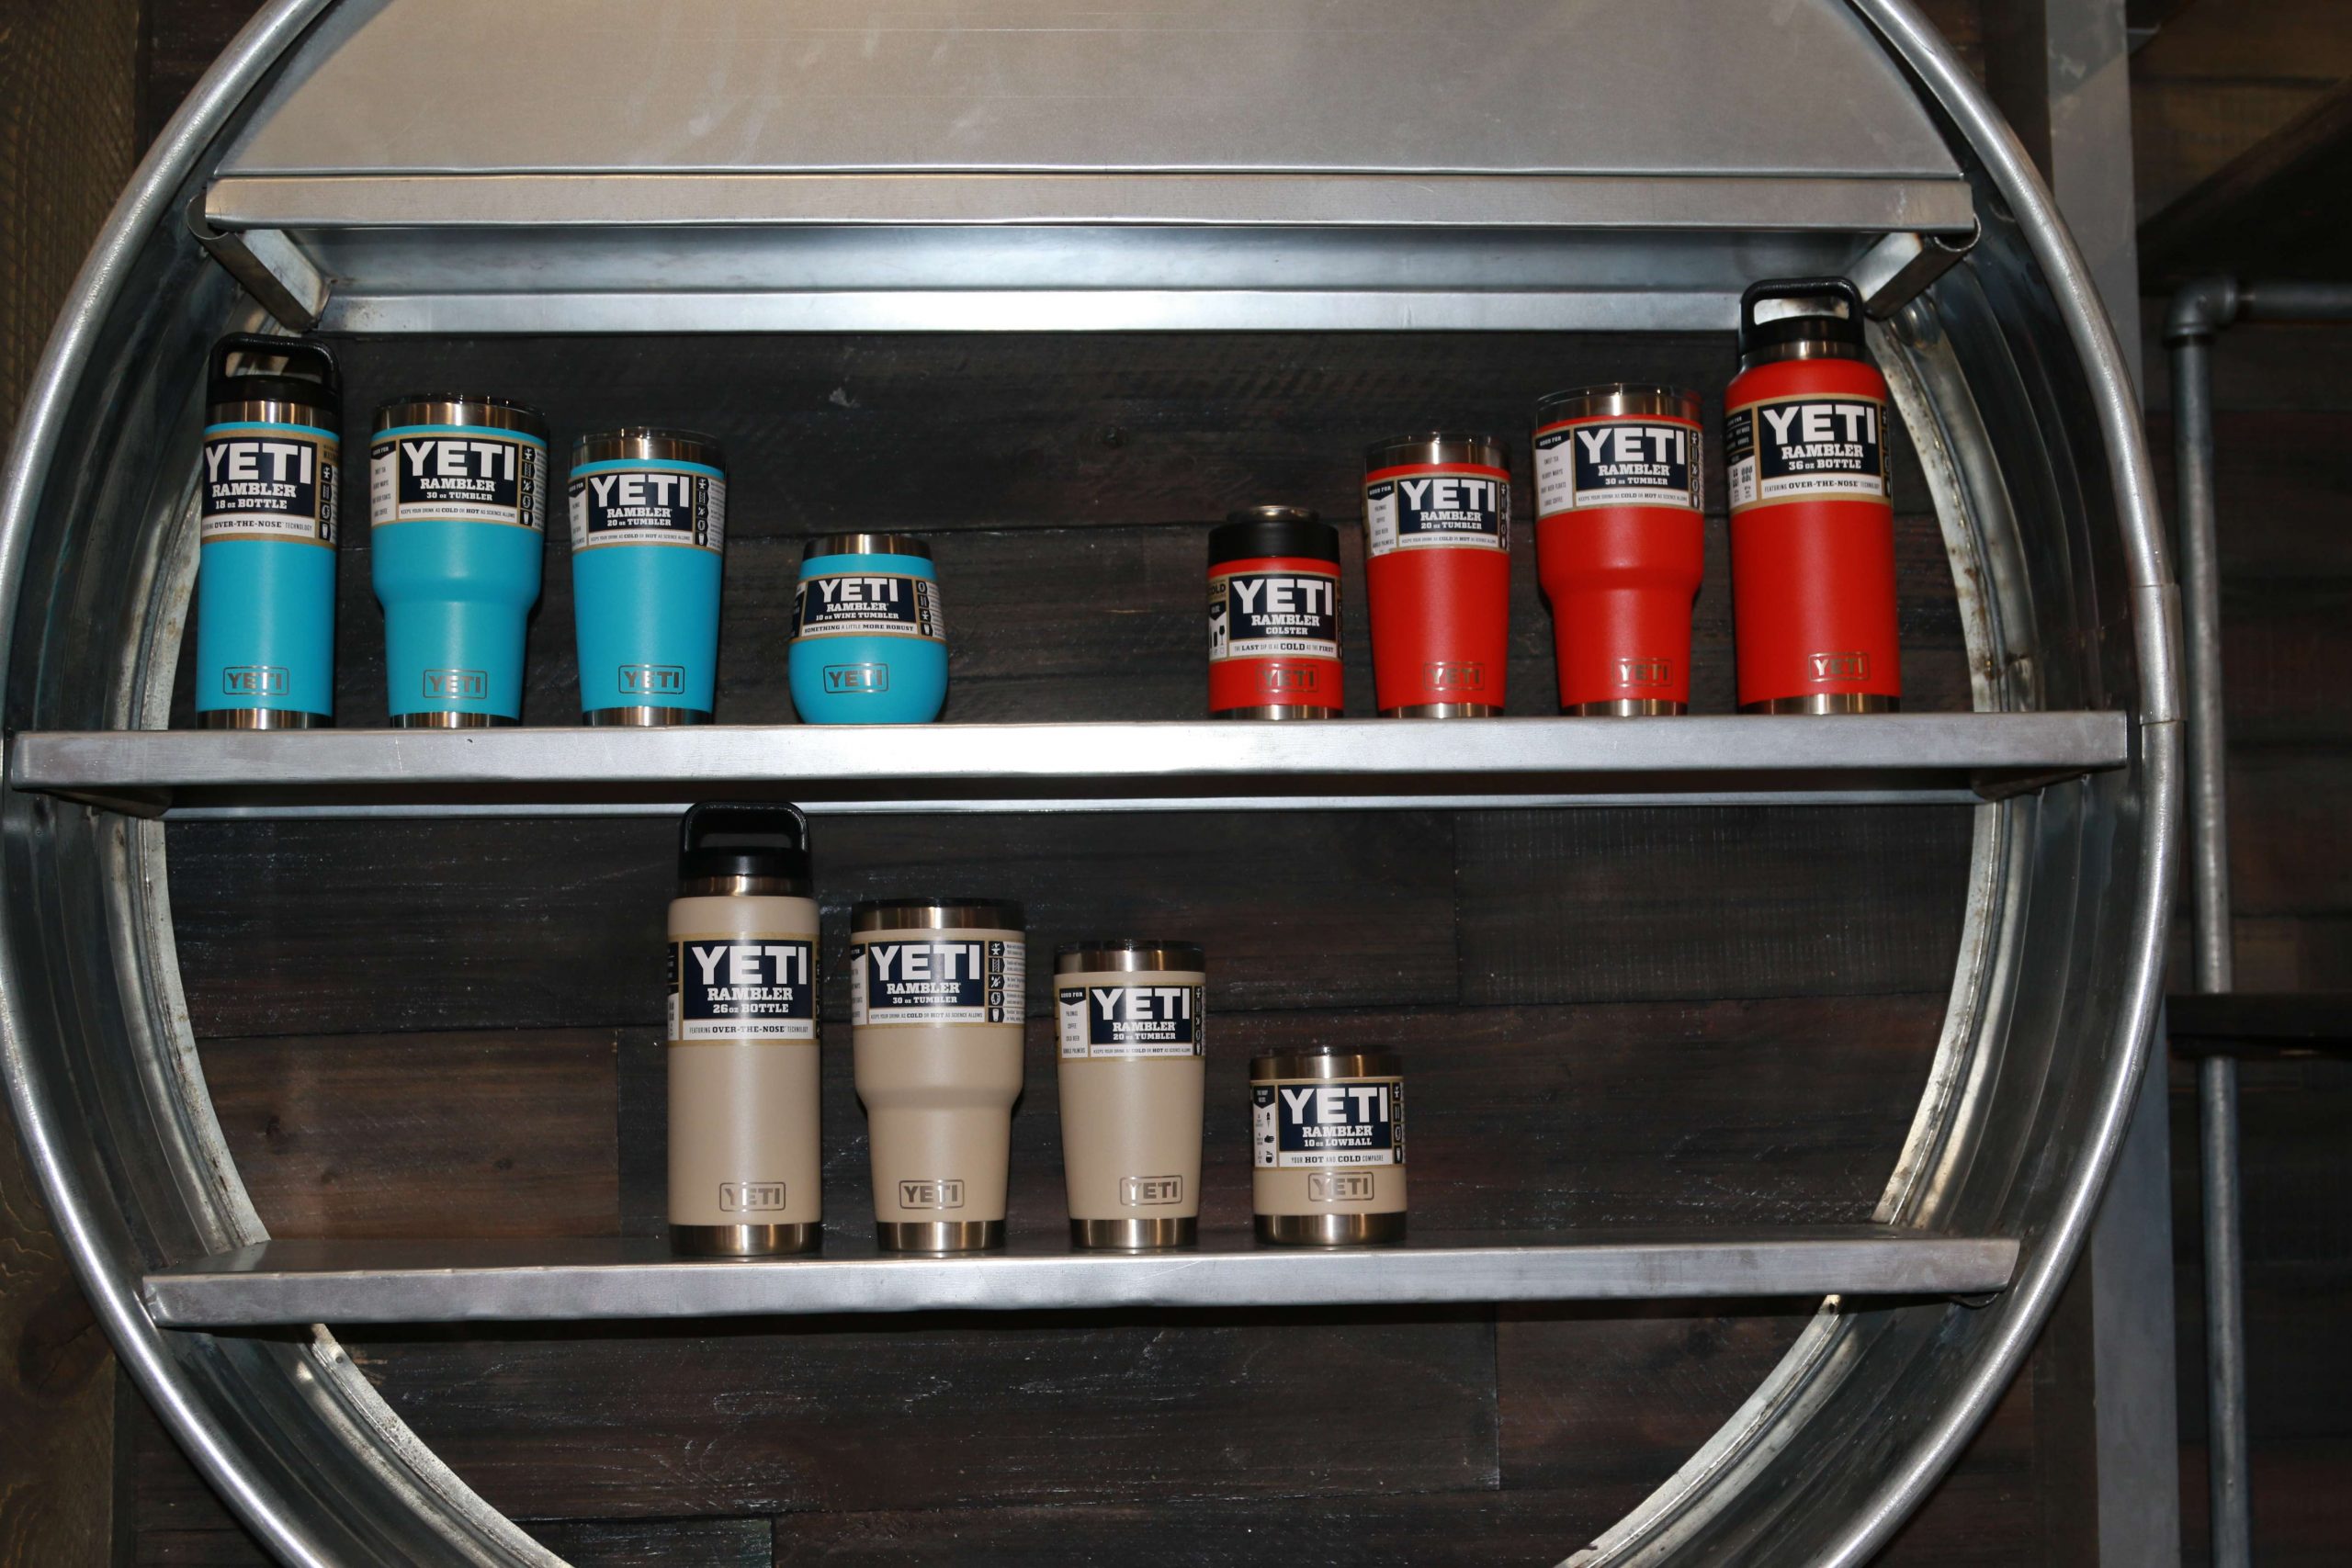 Check out those sweet new colors for the YETI Ramblers.